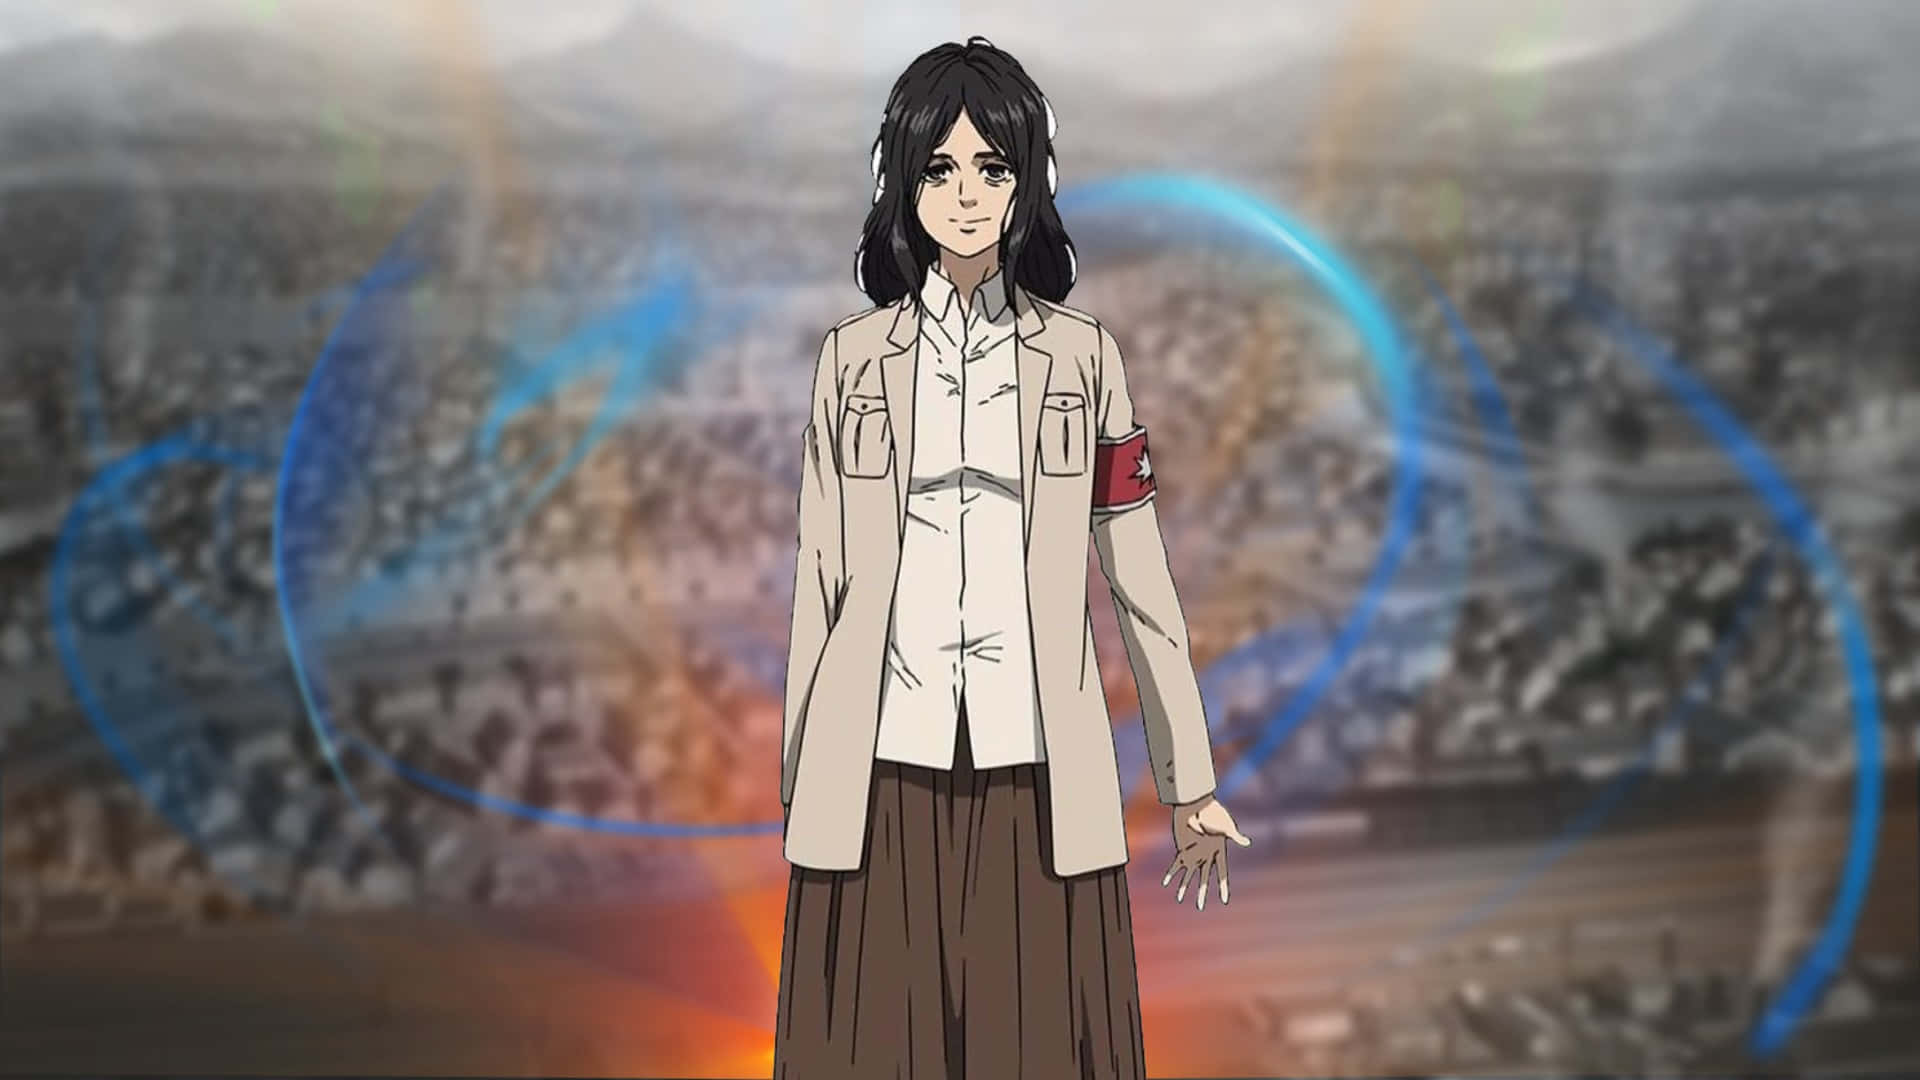 A Woman In A White Shirt Standing In Front Of A Crowd Wallpaper